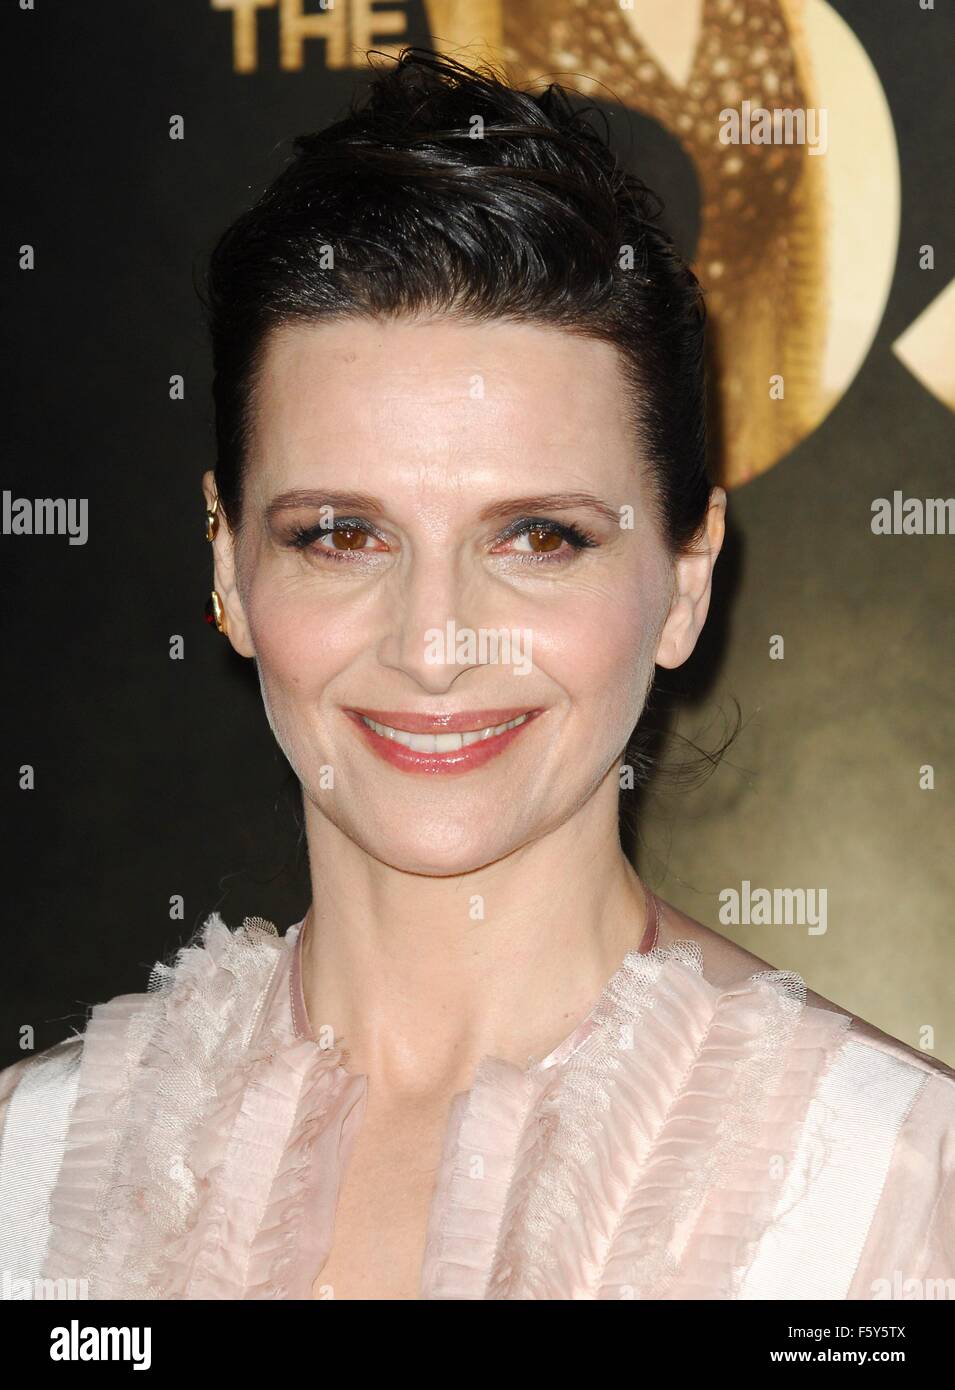 Los Angeles, CA, USA. 9th Nov, 2015. Juliette Binoche at arrivals for THE 33 Premiere at at AFI Fest, TCL Chinese 6 Theatres (formerly Grauman's), Los Angeles, CA November 9, 2015. Credit:  Elizabeth Goodenough/Everett Collection/Alamy Live News Stock Photo